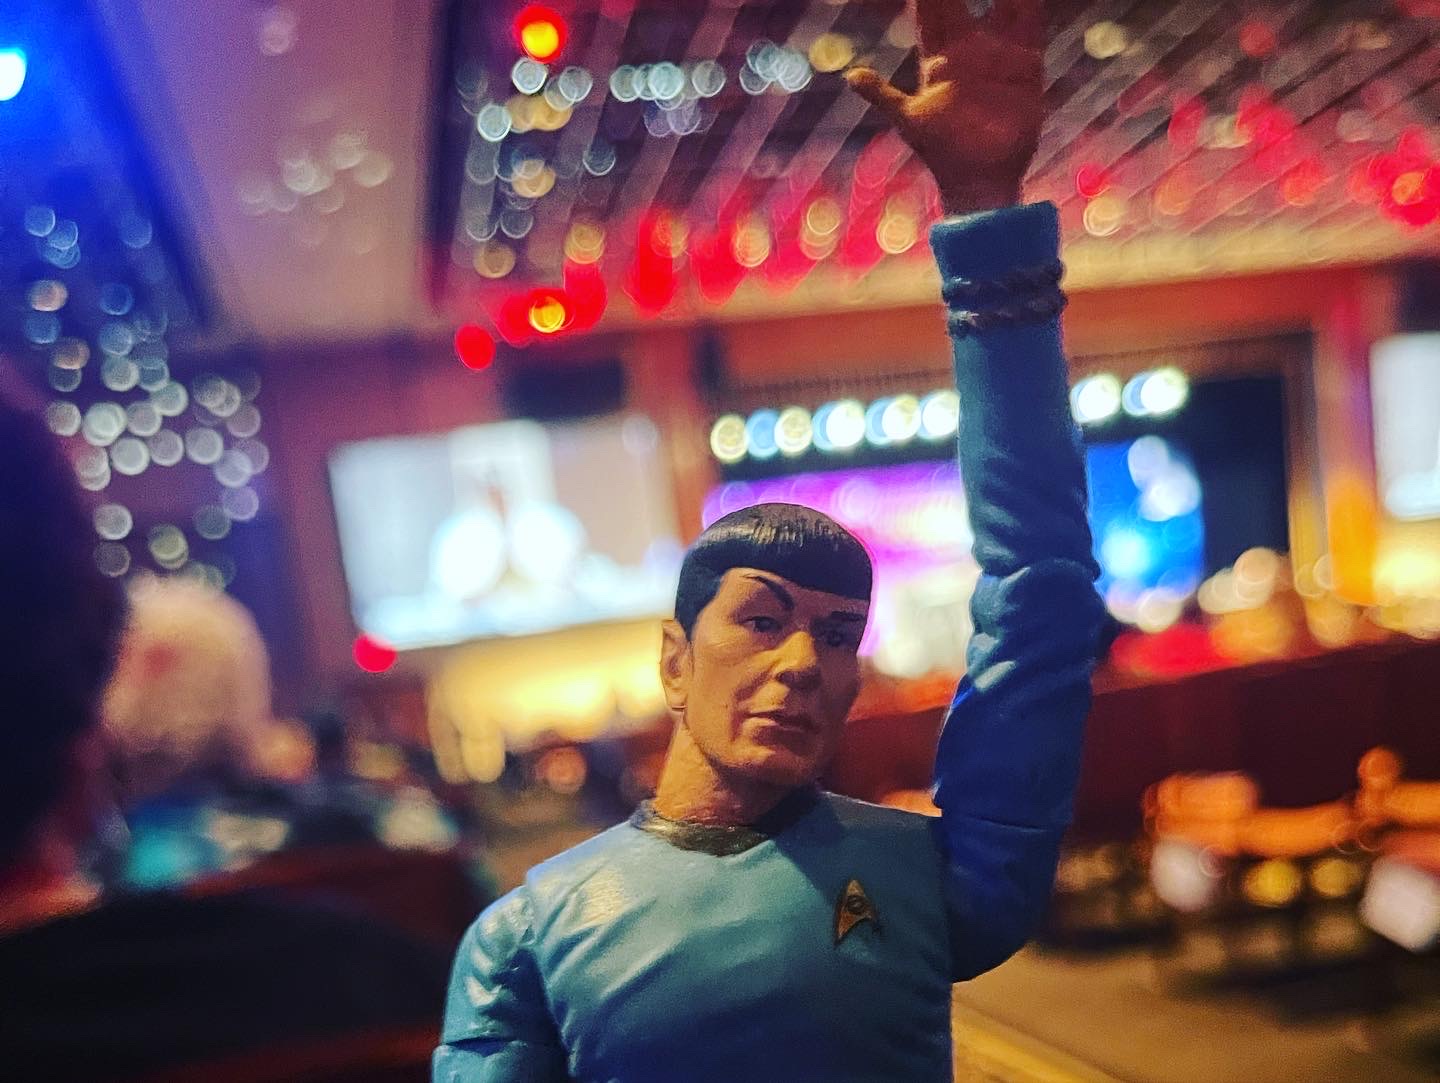 Spock Action Figure Raising his hand to ask Cirroc Loften a question!